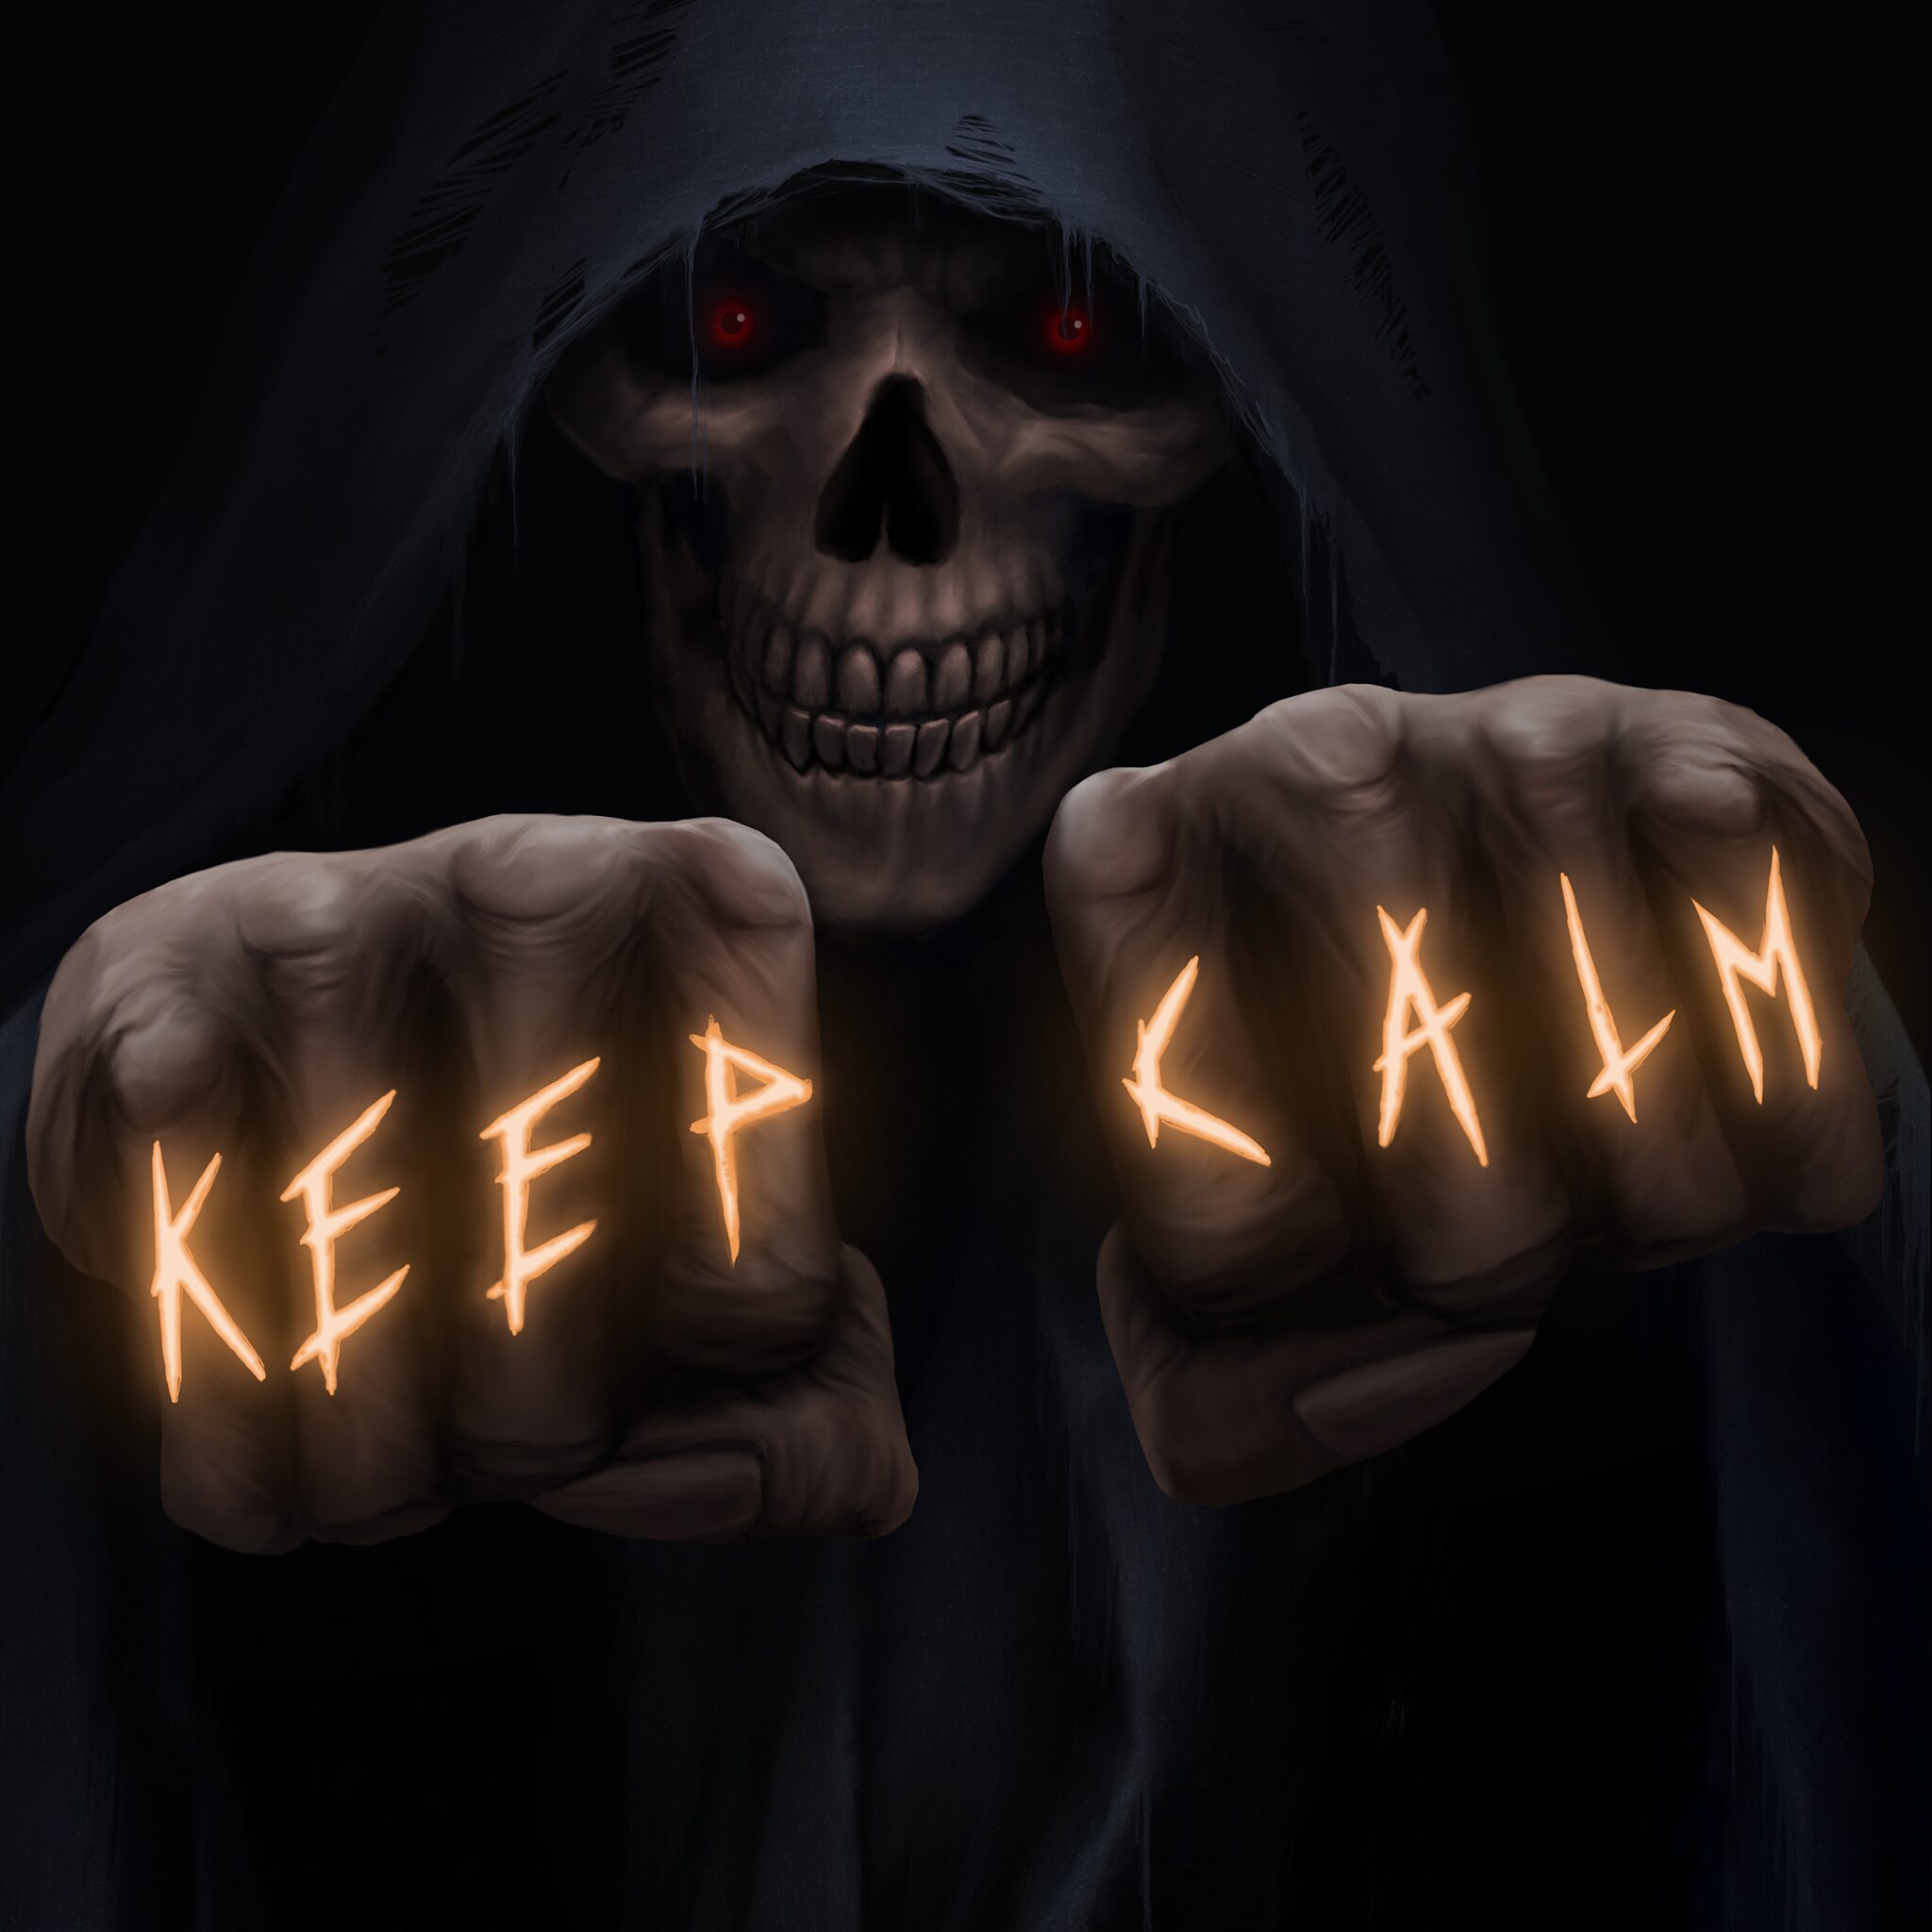 XPOSED  Keep Calm Skull Avatar PS4  buy online and track price history   PS Deals France